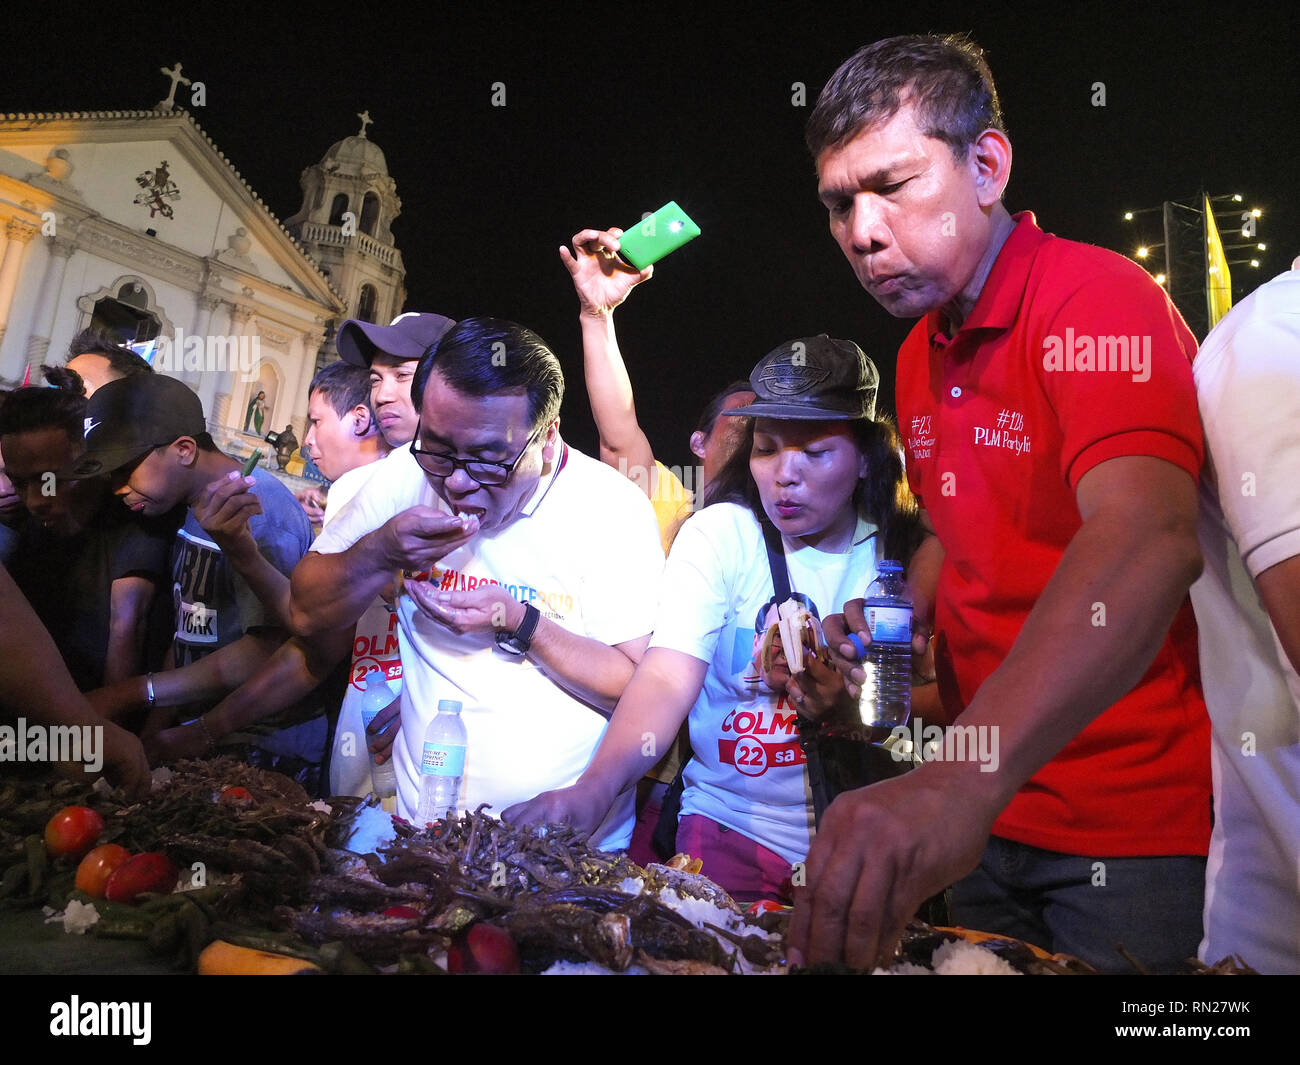 Former representative Neri Colmenares (L) and labor leader Leody de Guzman (R) seen participating in the boodle fight during the rally. 'Labor Win' a coalition of labor leaders running for Senate, said they are the only ones who have the 'real' credentials to push for pro-poor policies unlike other candidates for this year elections. the policial party 'Partido ng Lakas ng Masa' offers themselves as alternatives in this year's elections. They say they don't belong to either the administration or opposition Stock Photo